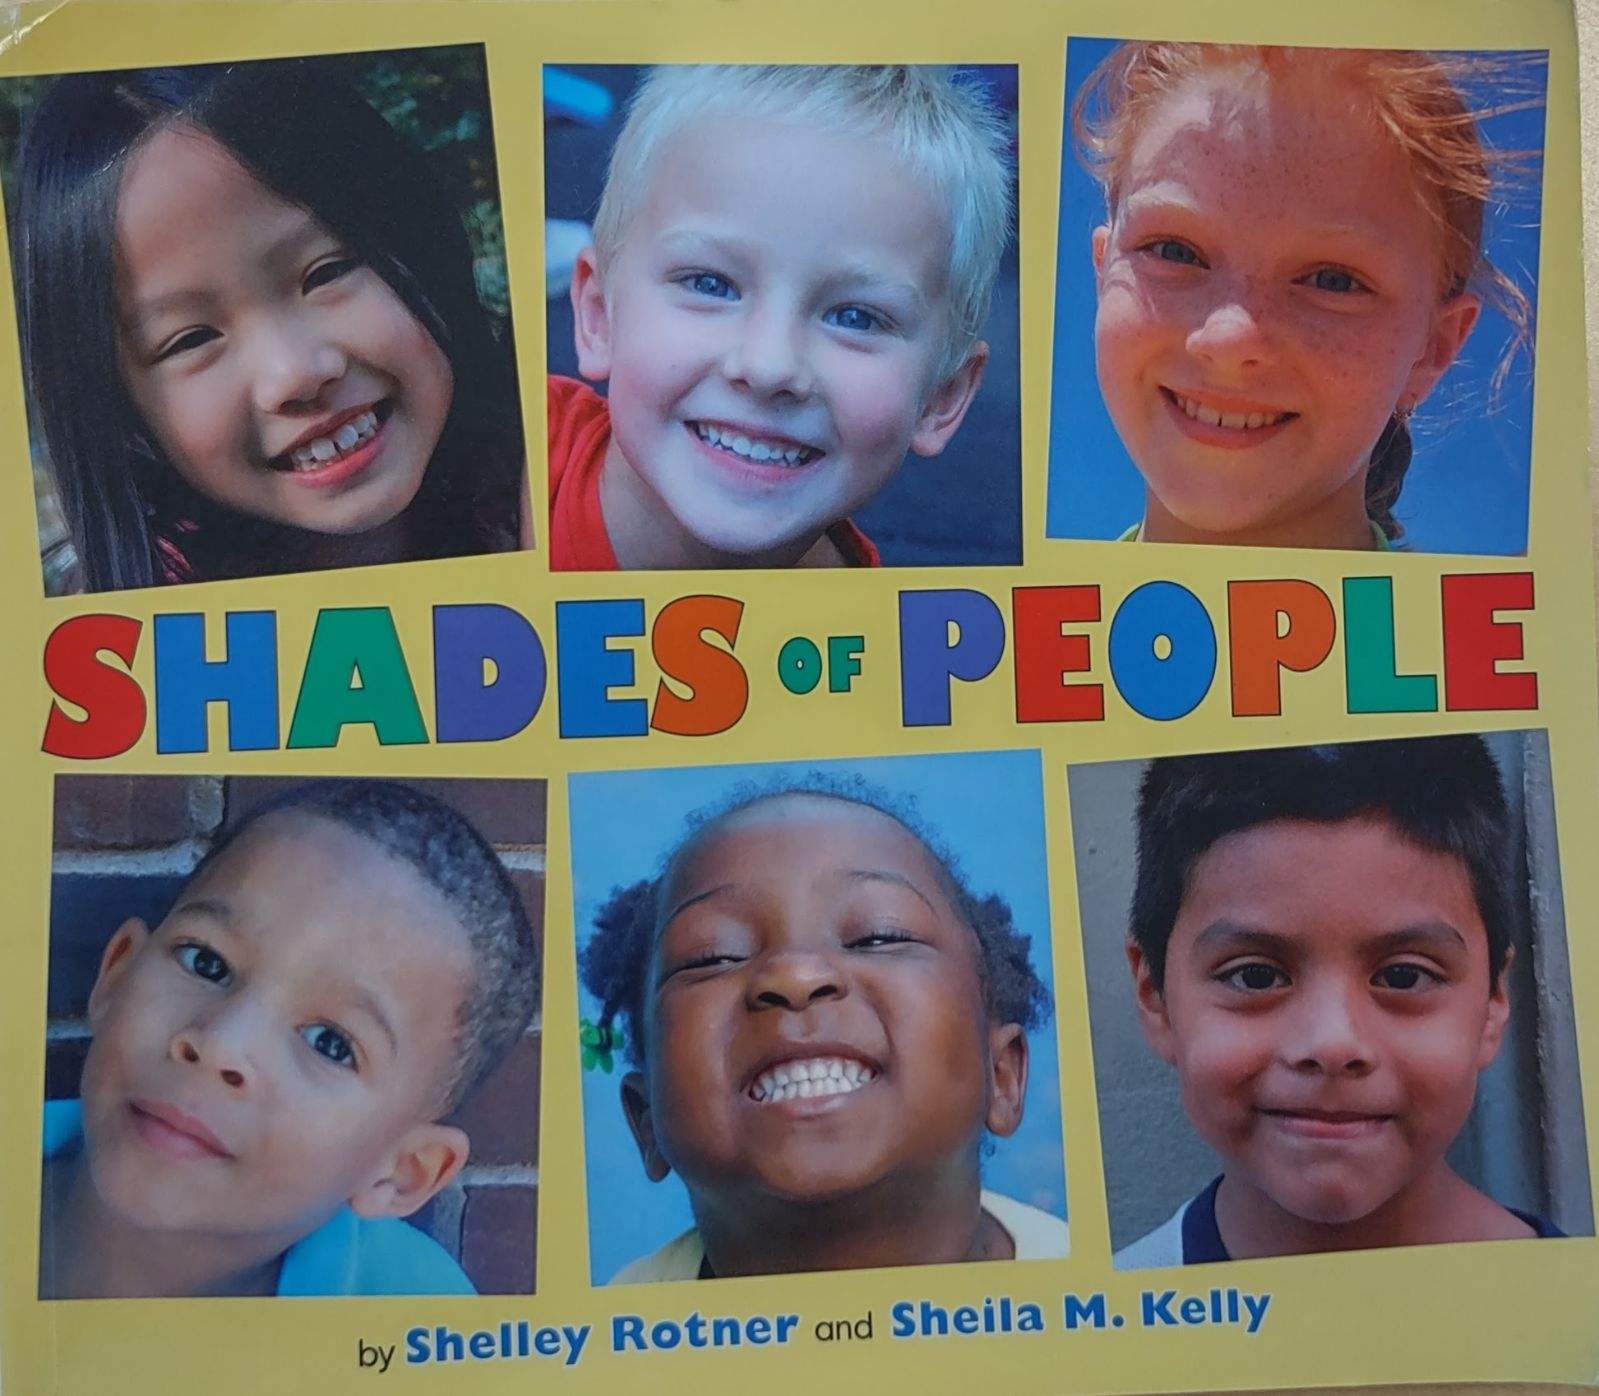 How we can discuss subjects like race and identity with preschoolers